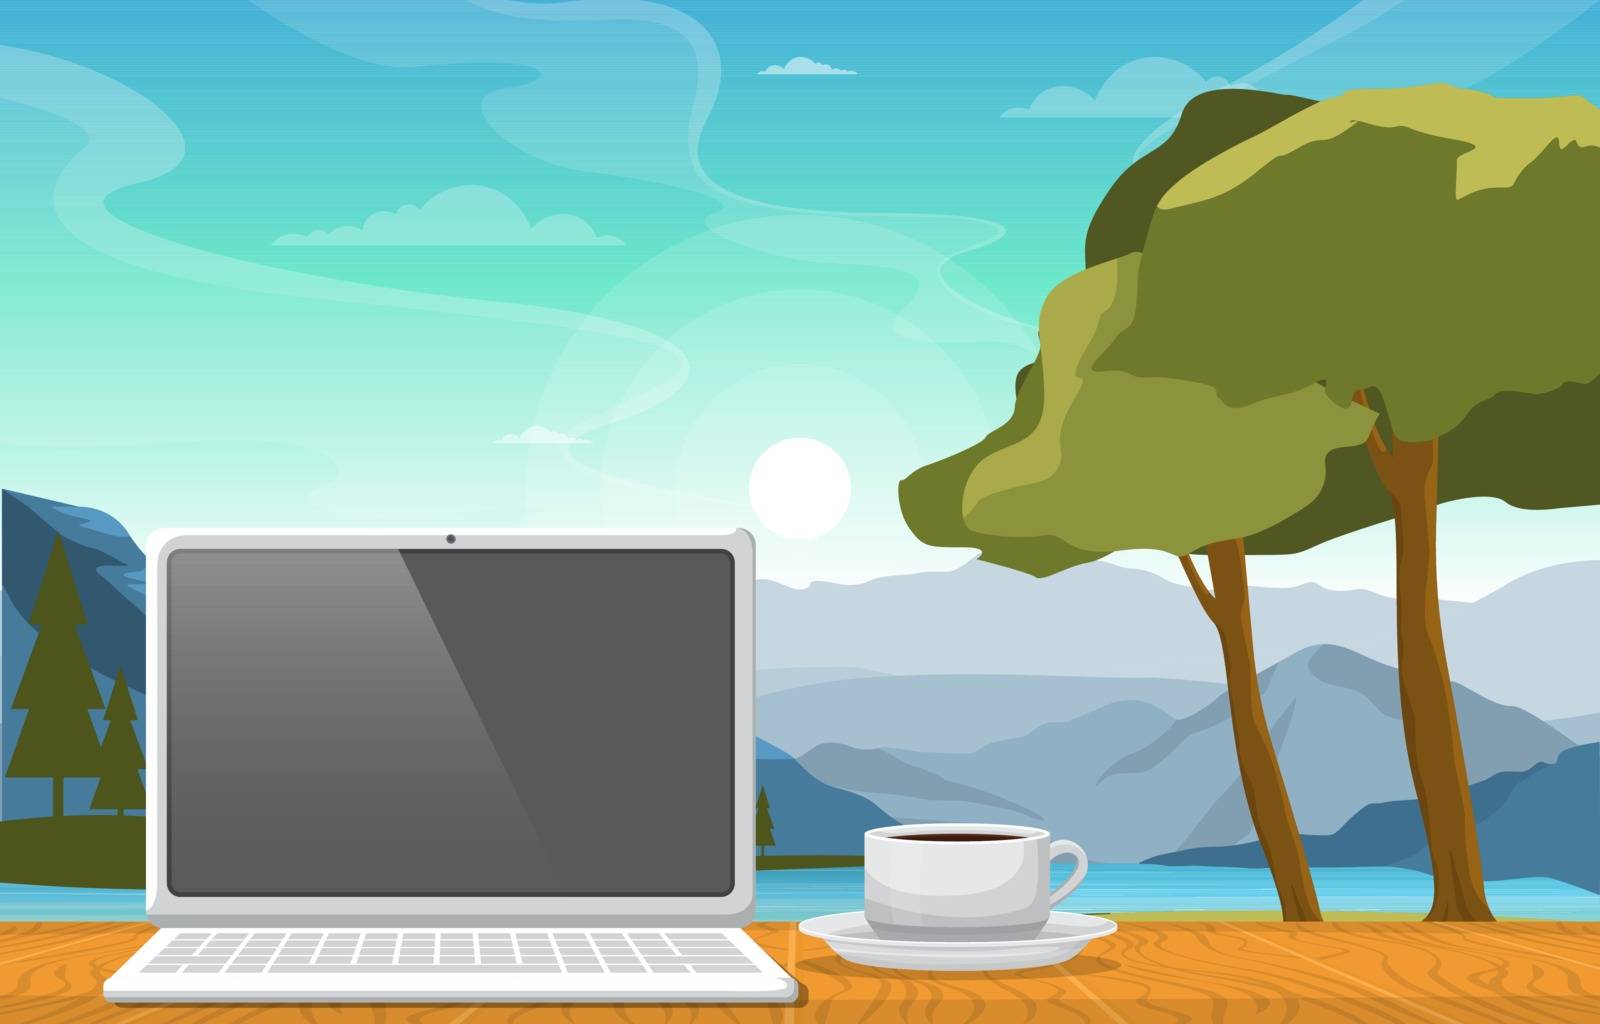 Working with a Cup of Tea on Table in Mountain Lake View Illustration